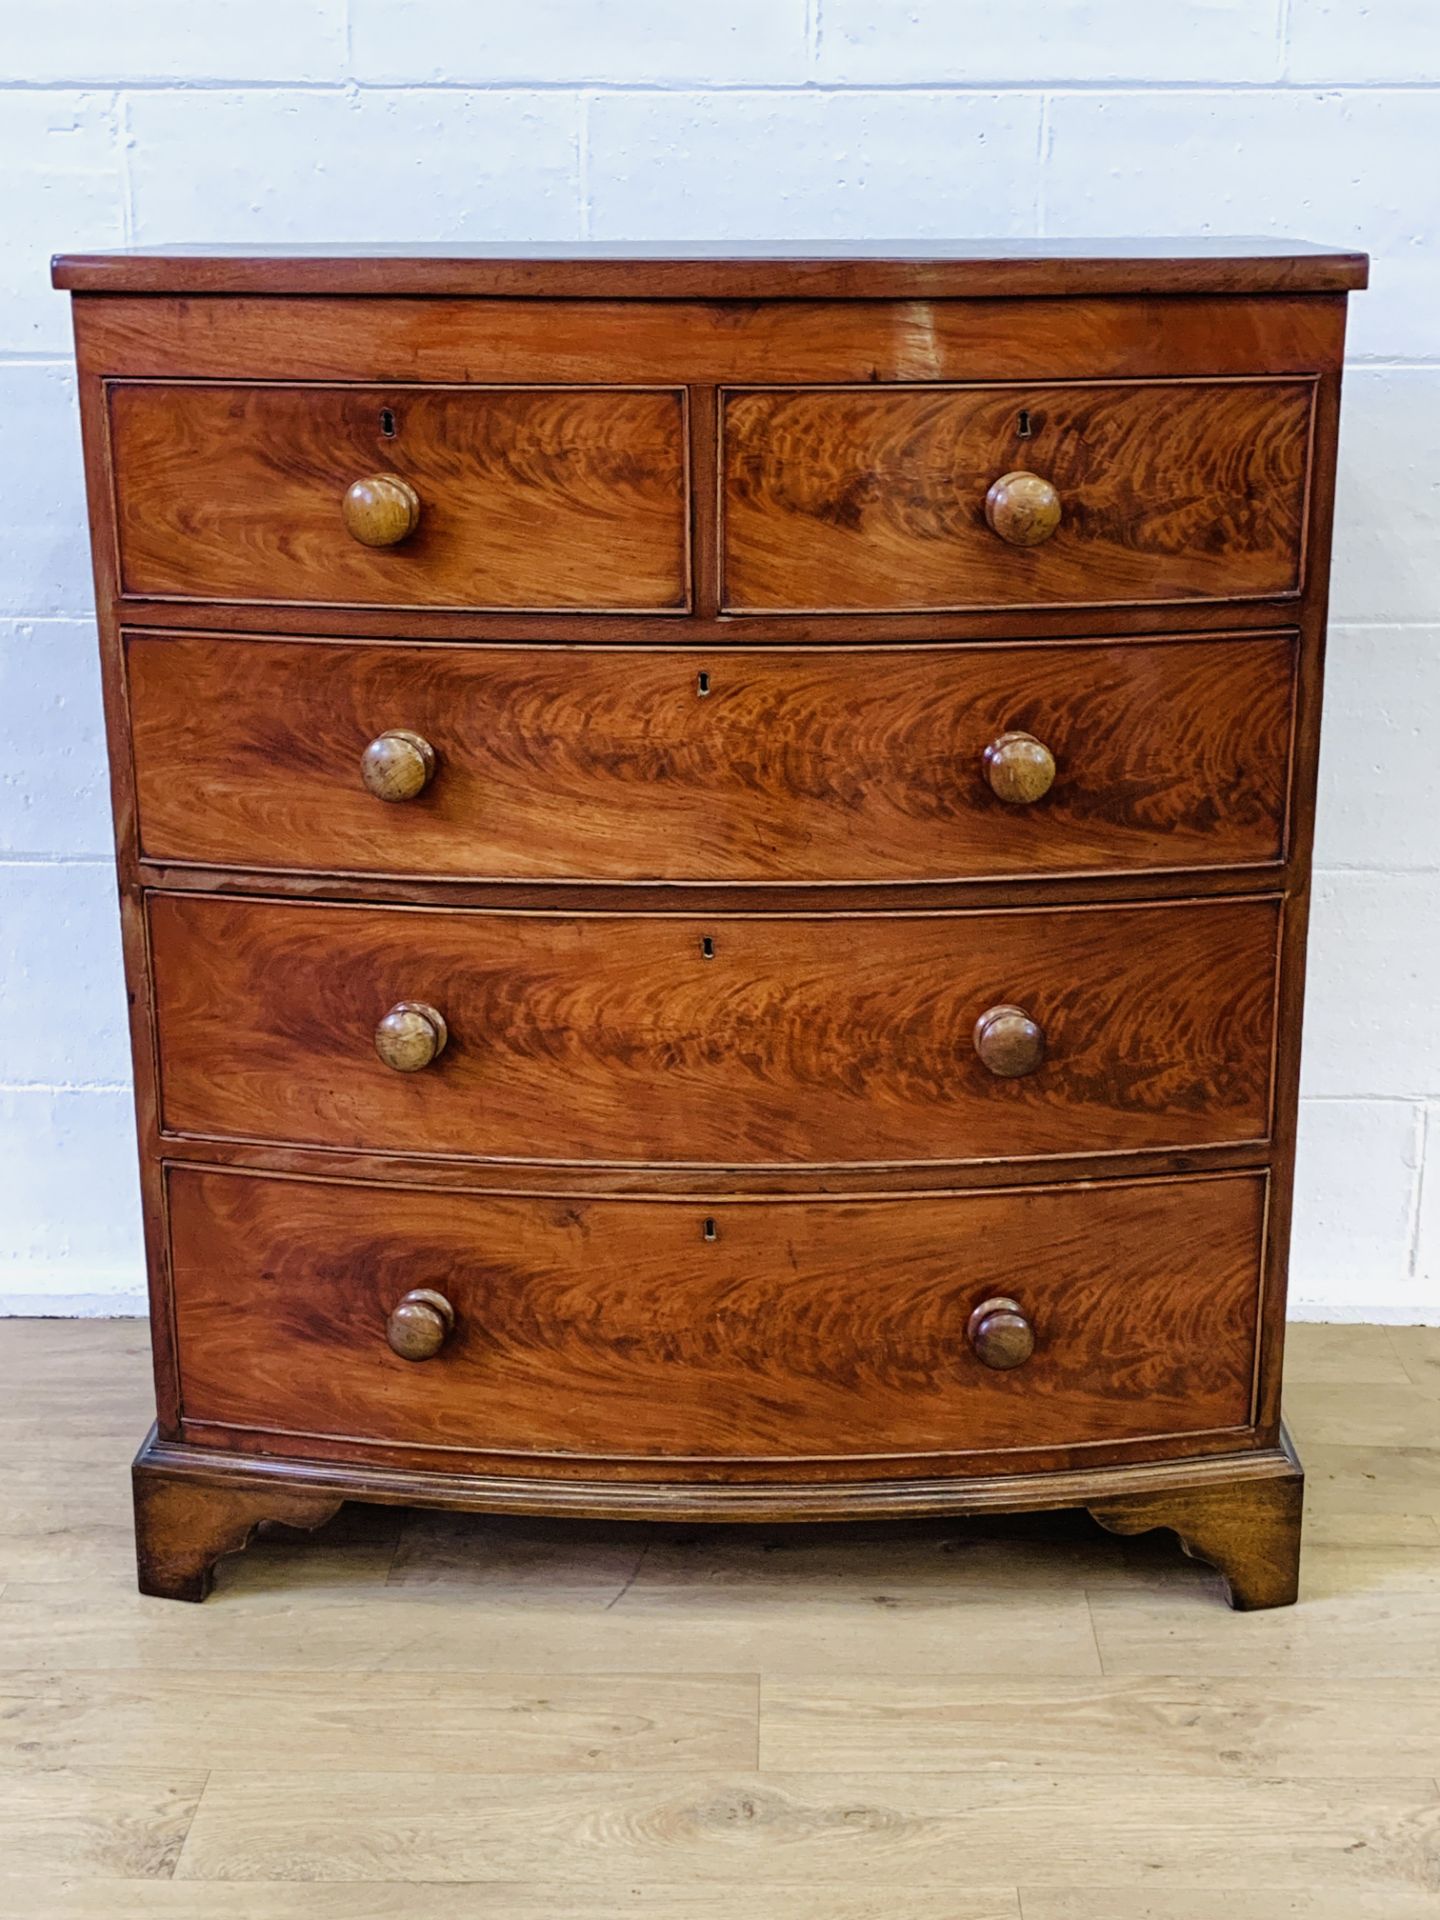 Mahogany chest of drawers - Image 4 of 7